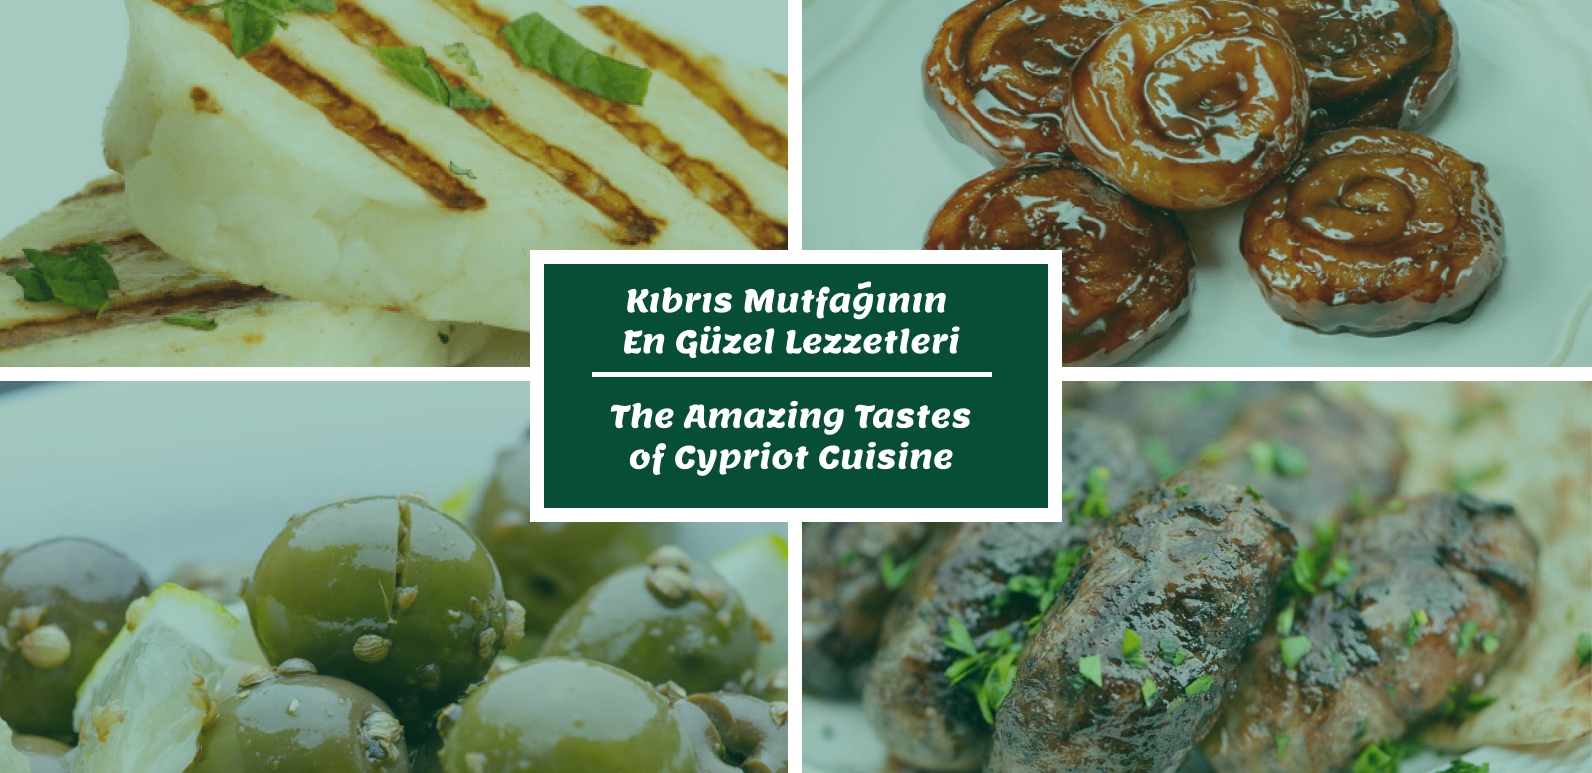 The Amazing Tastes of Cypriot Cuisine